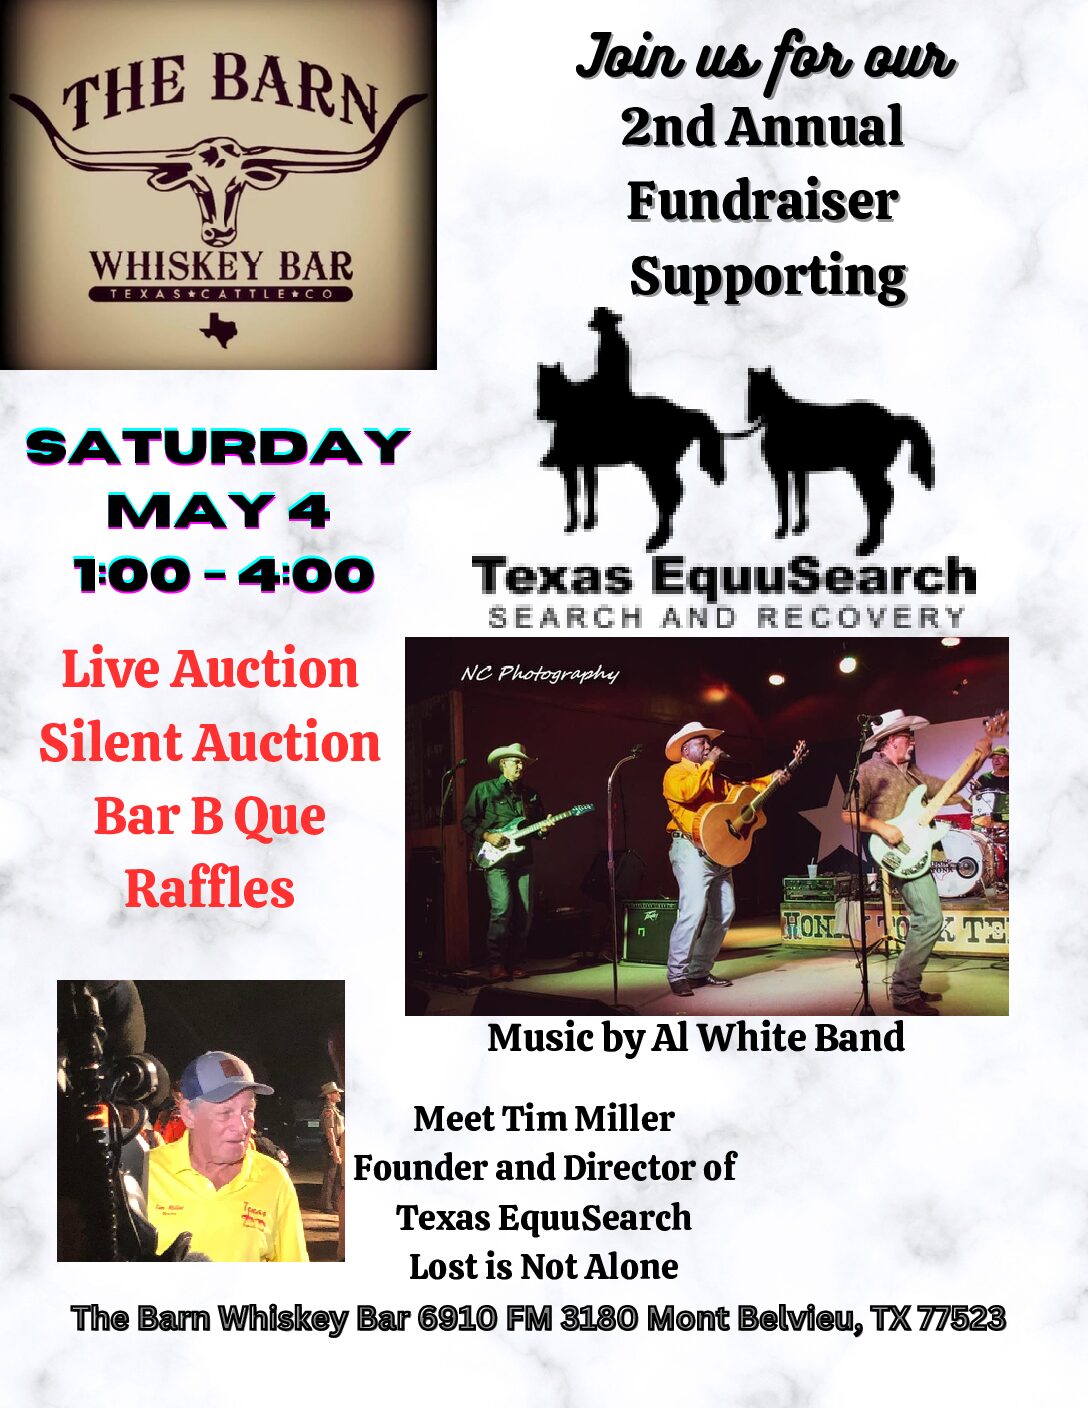 The Barn Whiskey Bar Fundraiser supportingTexas EquuSearch